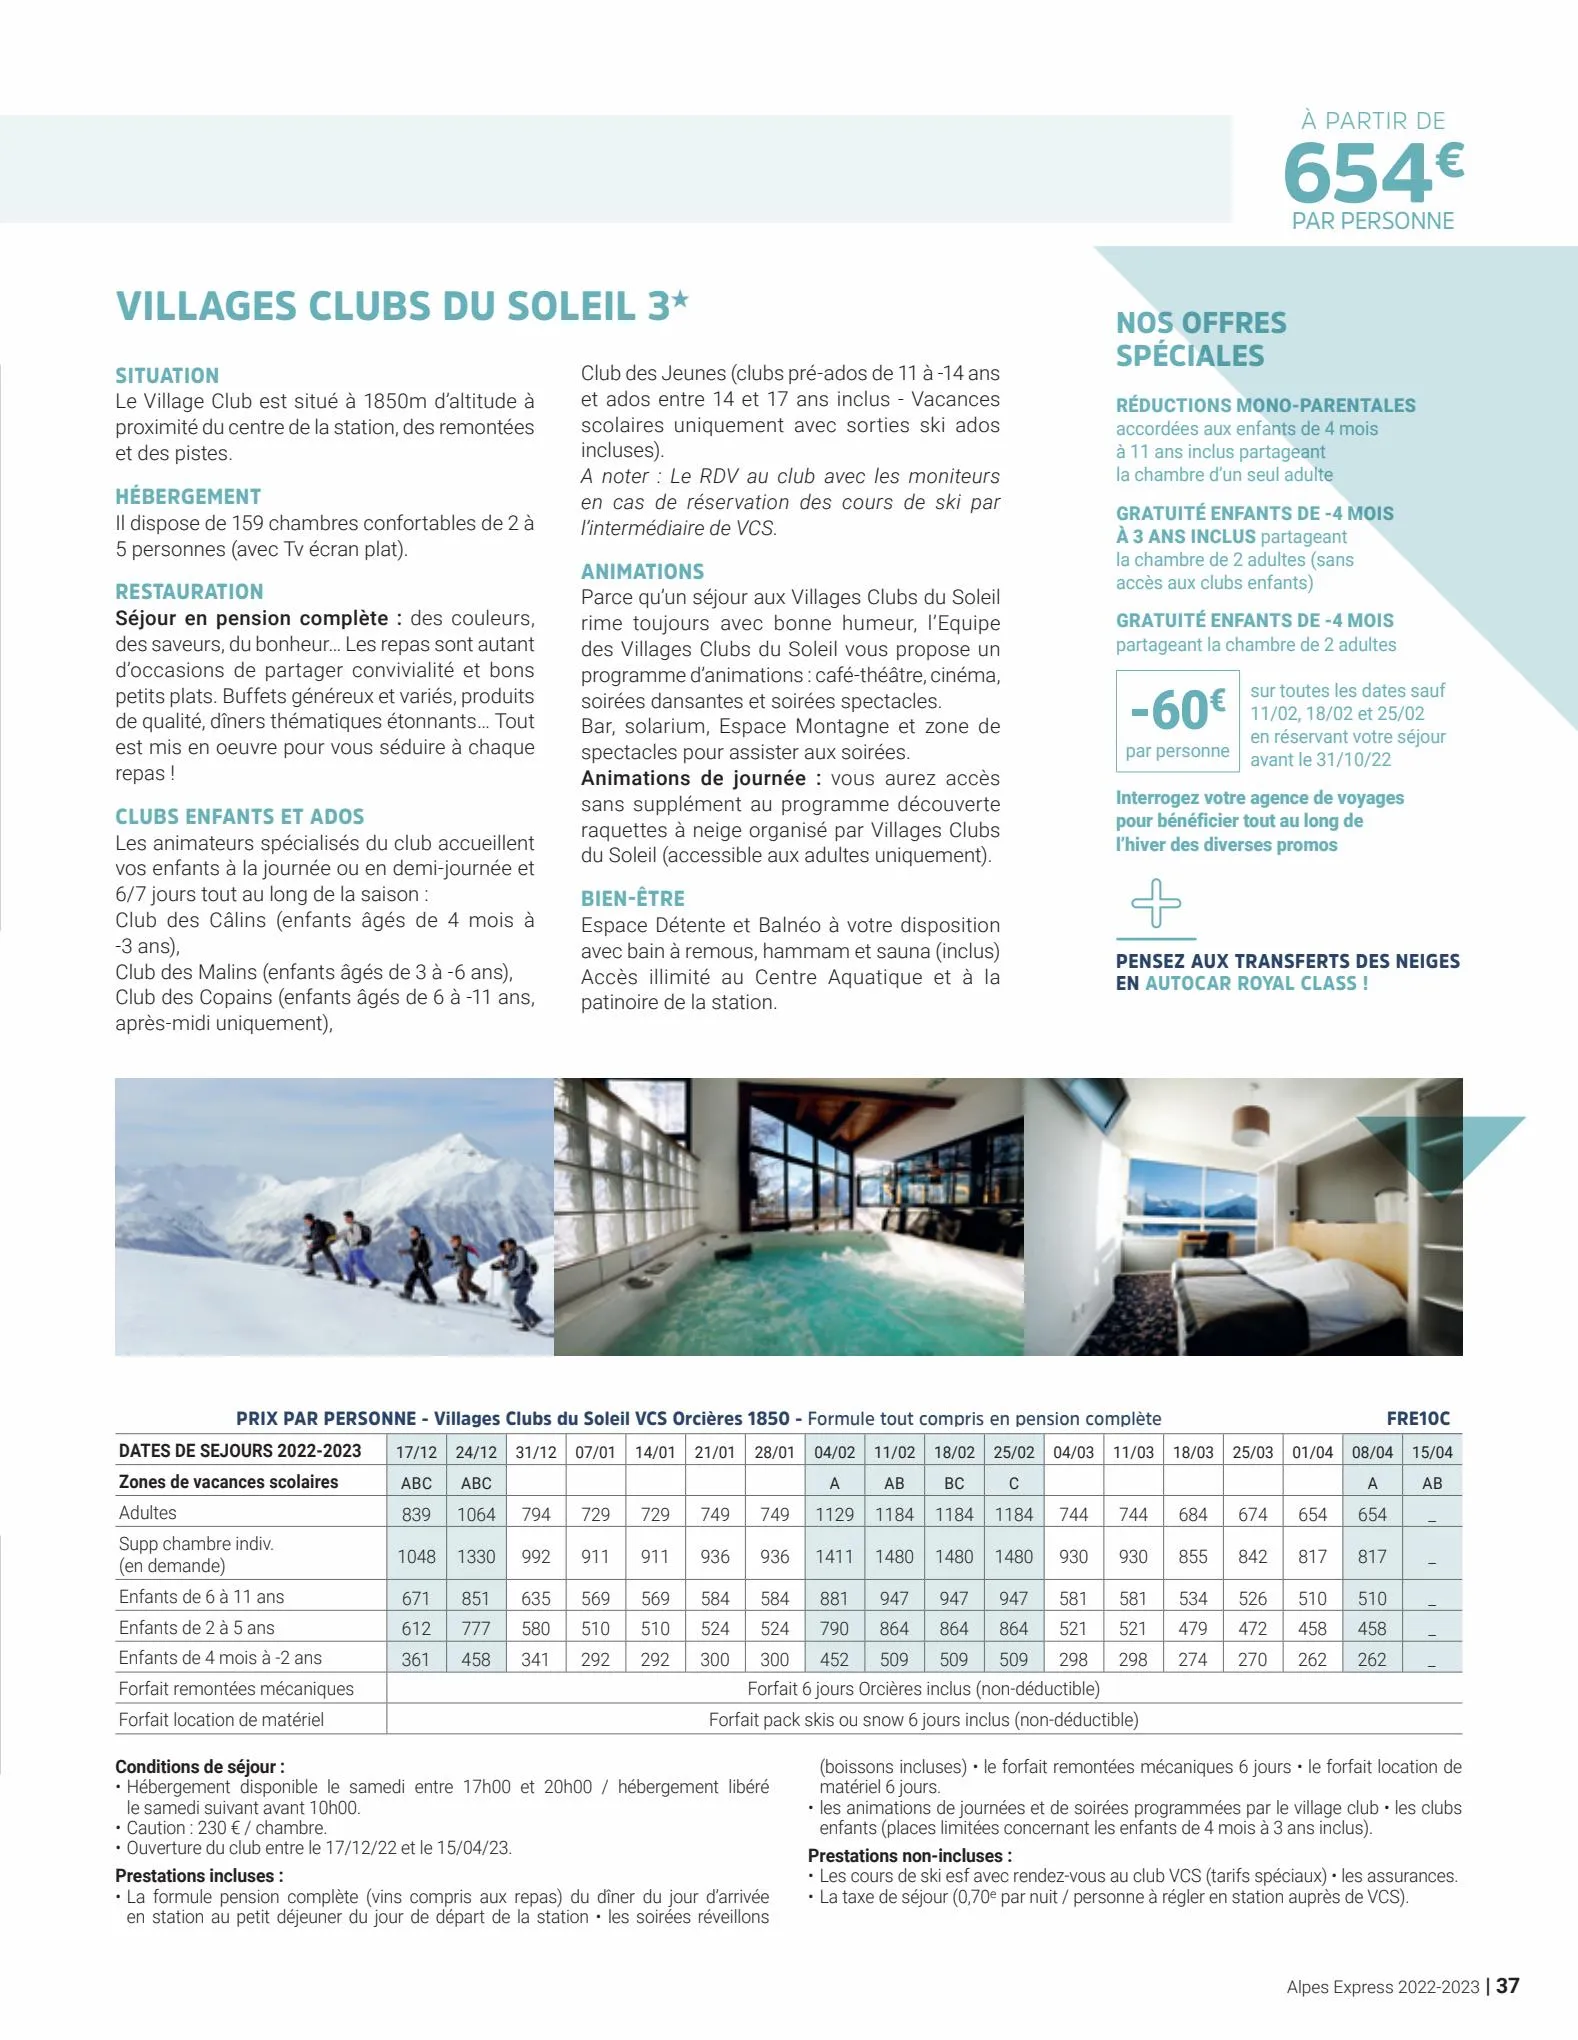 Catalogue Alpes Express - Hiver 2022-2023, page 00037